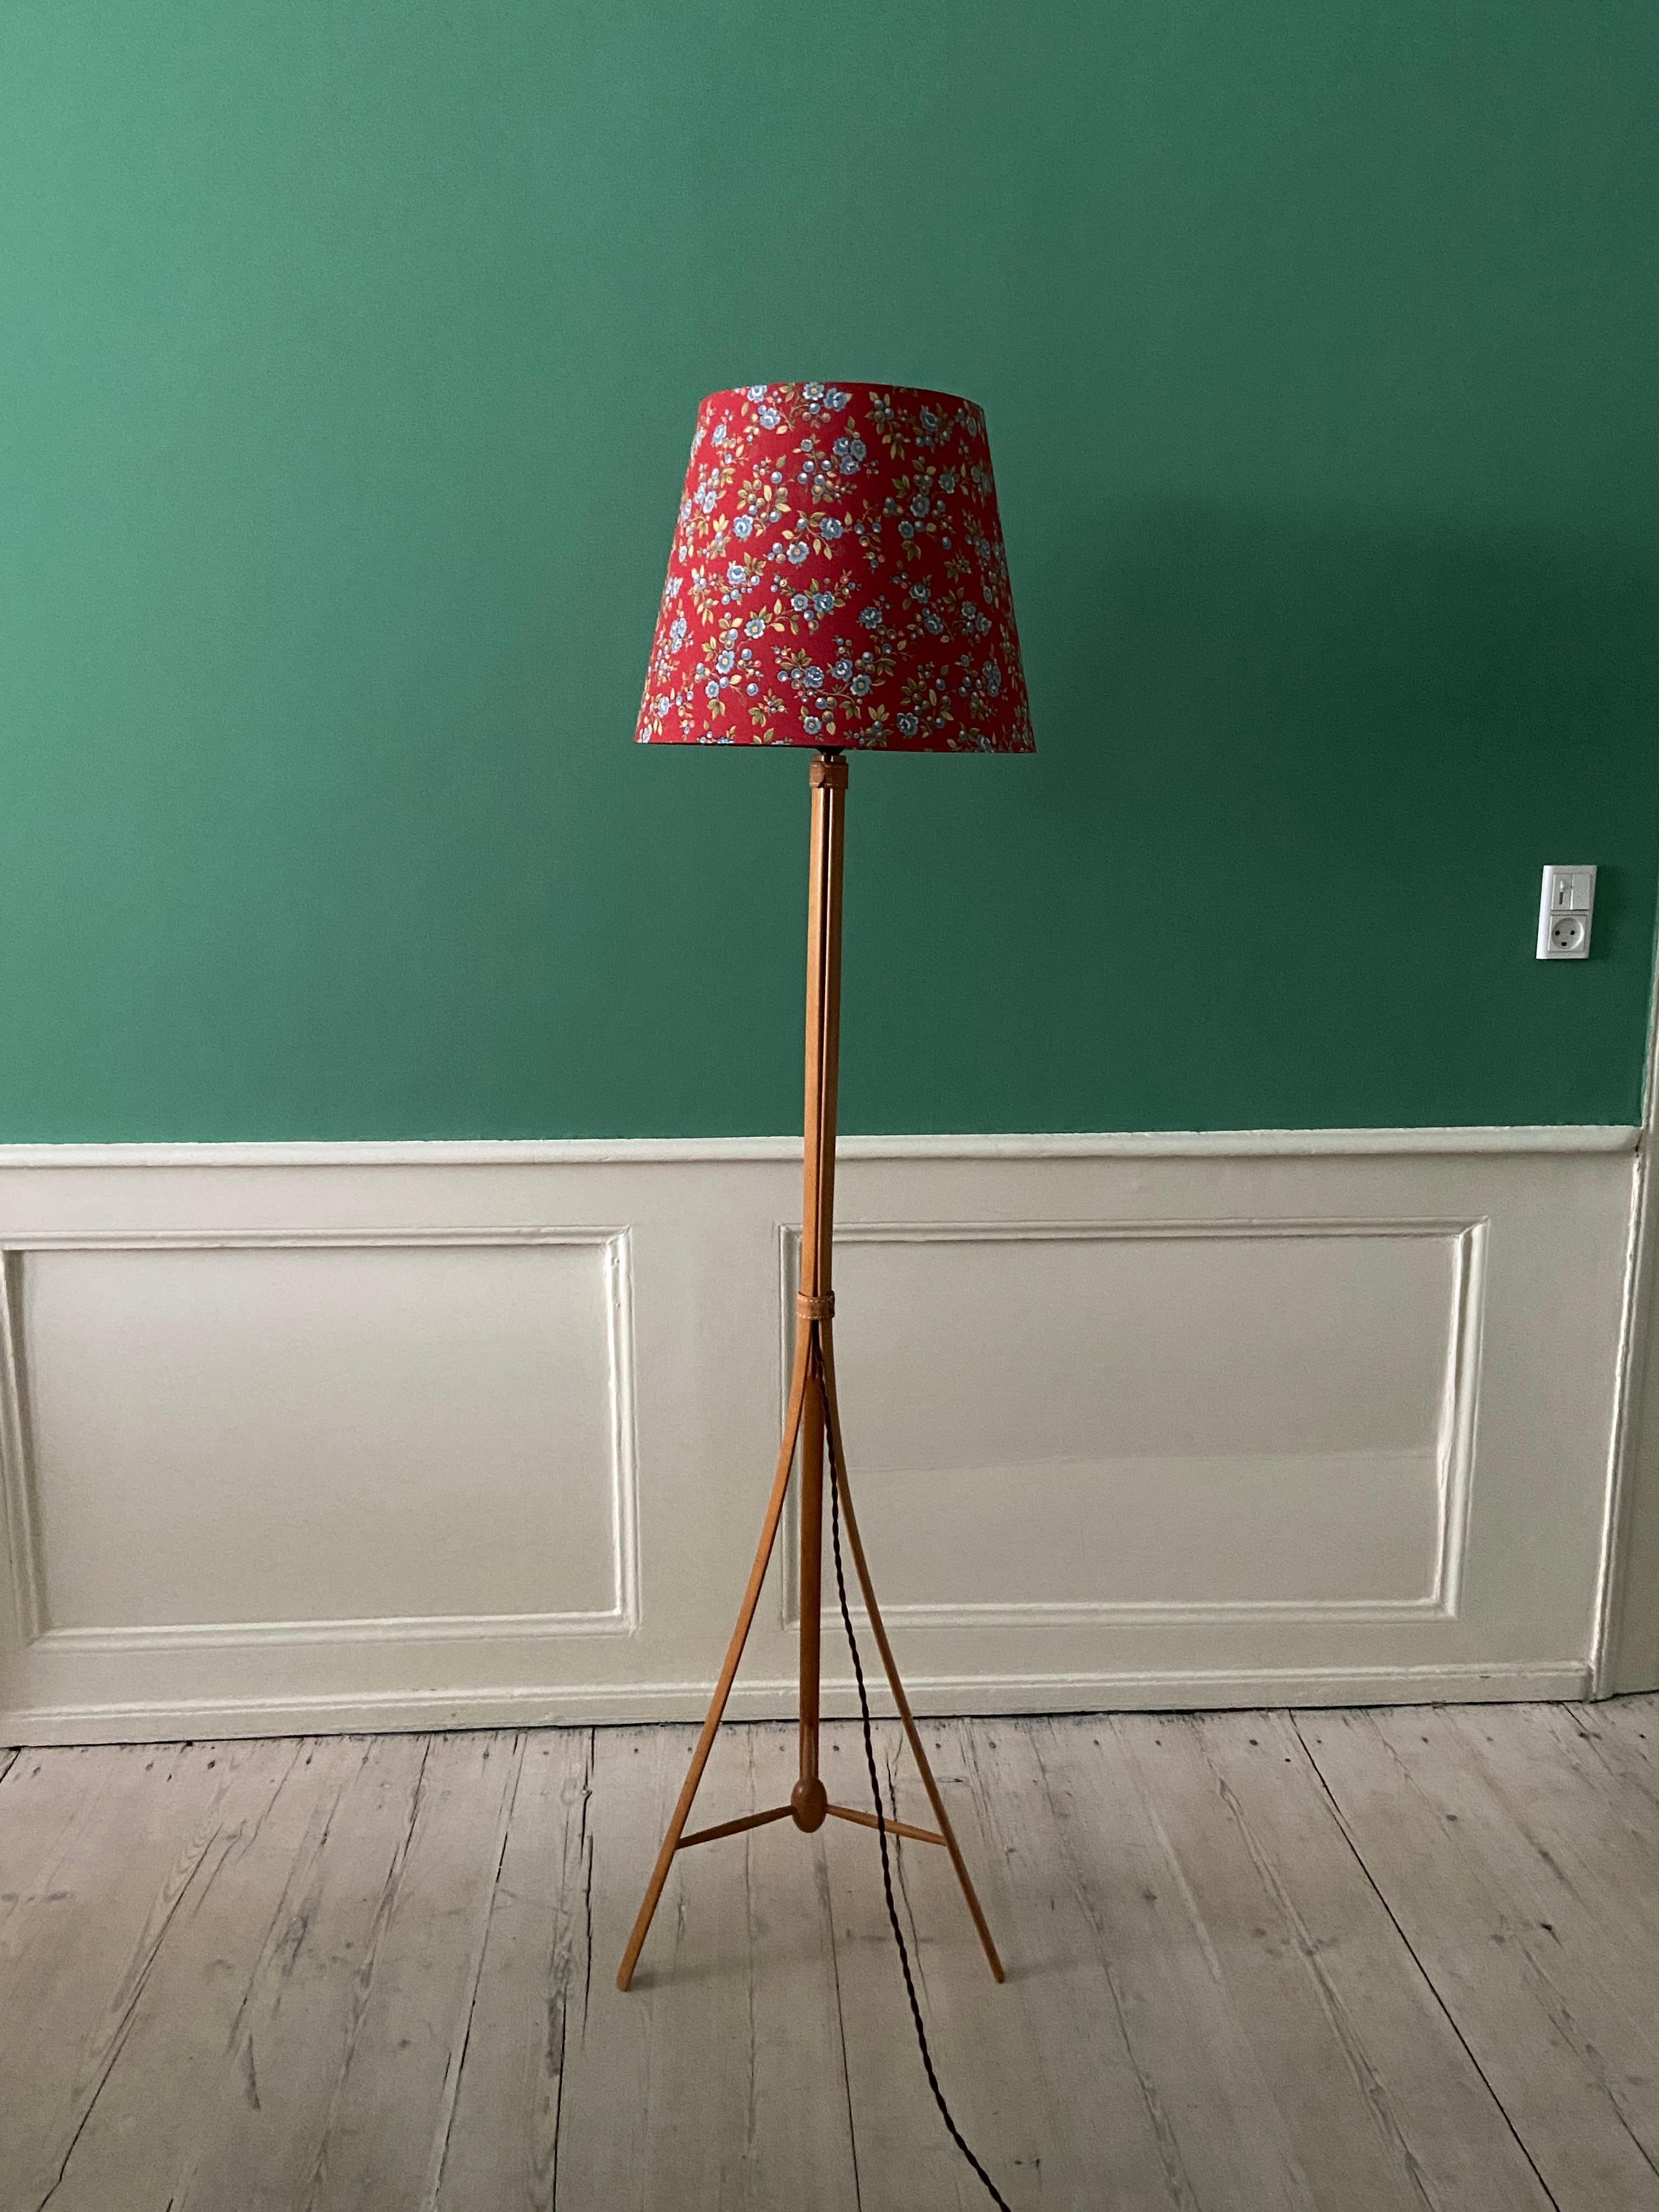 Mid-20th Century Vintage Alf Svensson Floor Lamp in Birch with Customized Shade, Sweden, 1950s